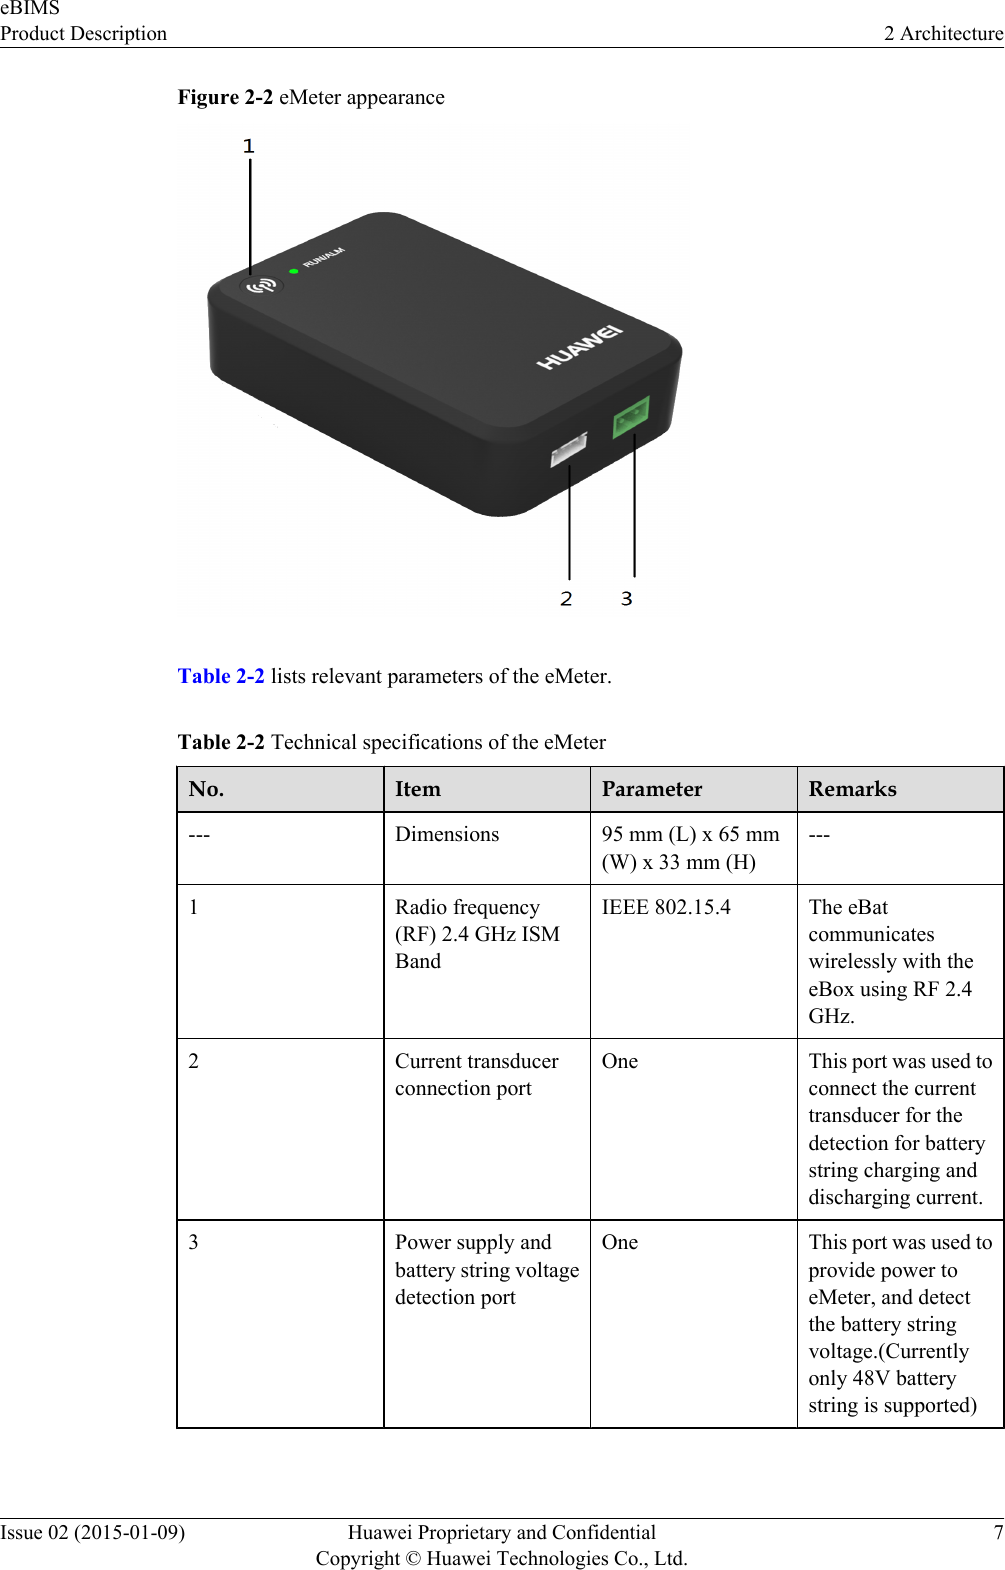 Figure 2-2 eMeter appearanceTable 2-2 lists relevant parameters of the eMeter.Table 2-2 Technical specifications of the eMeterNo. Item Parameter Remarks--- Dimensions 95 mm (L) x 65 mm(W) x 33 mm (H)---1 Radio frequency(RF) 2.4 GHz ISMBandIEEE 802.15.4 The eBatcommunicateswirelessly with theeBox using RF 2.4GHz.2 Current transducerconnection portOne This port was used toconnect the currenttransducer for thedetection for batterystring charging anddischarging current.3 Power supply andbattery string voltagedetection portOne This port was used toprovide power toeMeter, and detectthe battery stringvoltage.(Currentlyonly 48V batterystring is supported) eBIMSProduct Description 2 ArchitectureIssue 02 (2015-01-09) Huawei Proprietary and ConfidentialCopyright © Huawei Technologies Co., Ltd.7